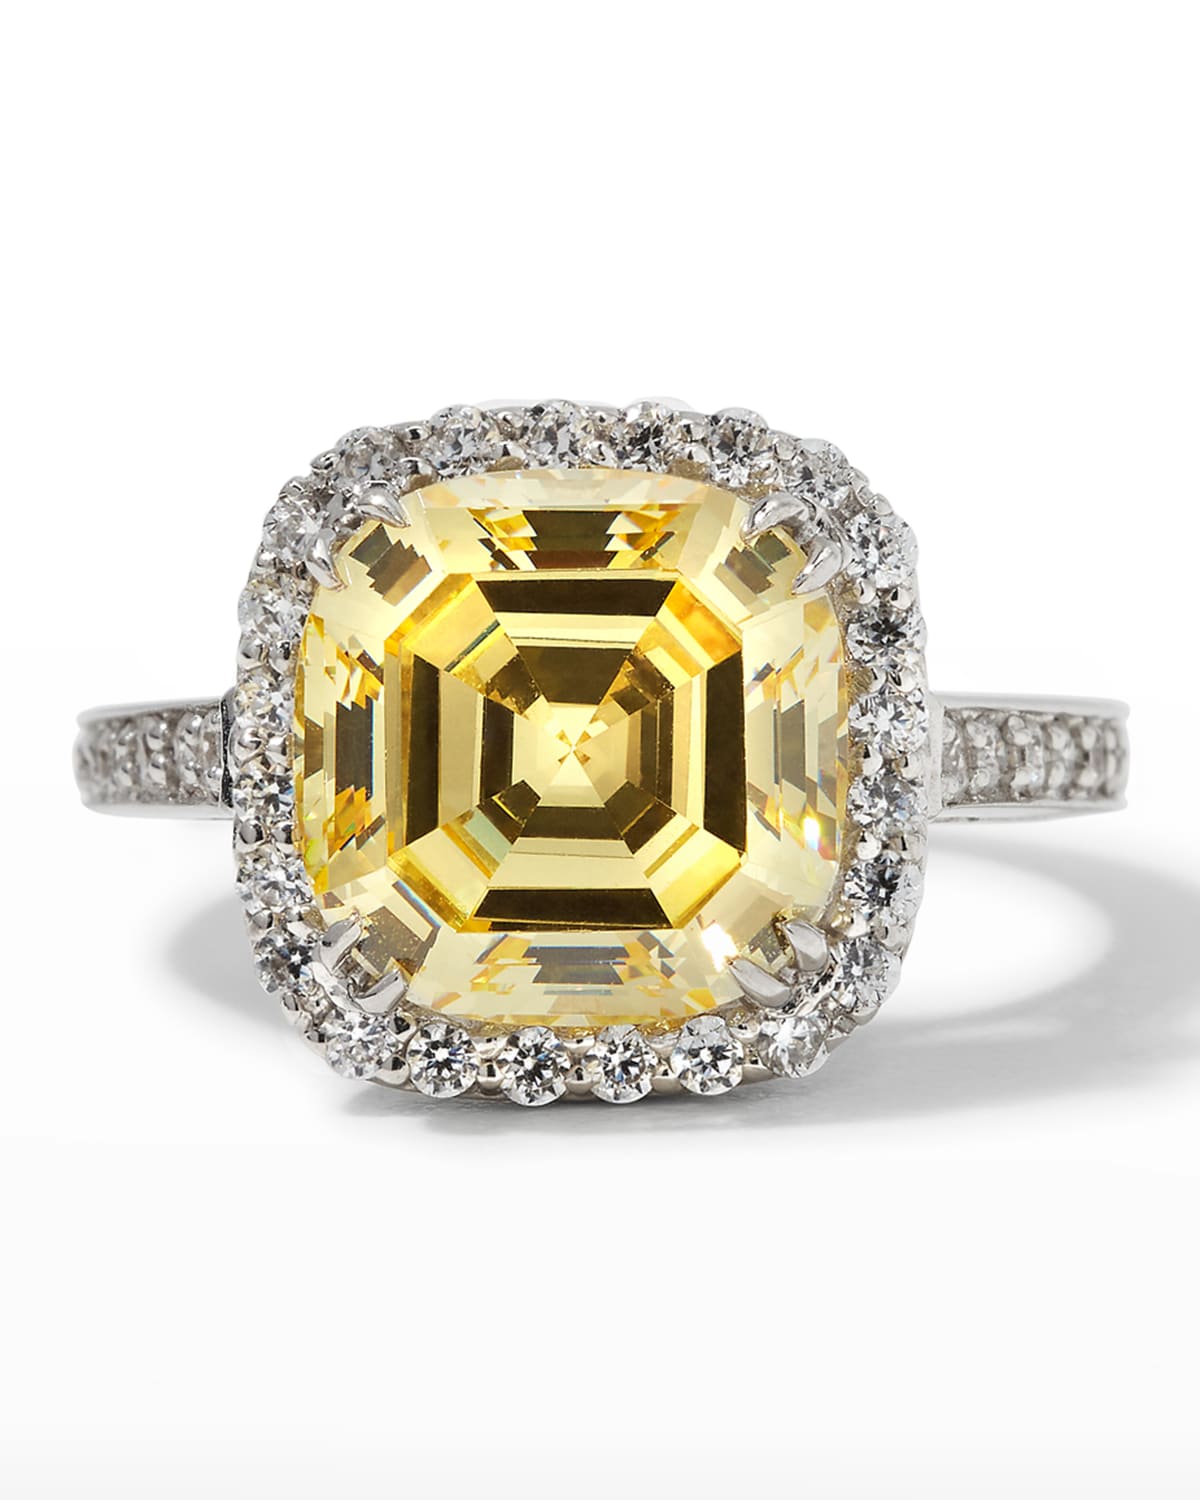 Cushion-Cut Center with Micropave Ring, Size 6-8, Canary